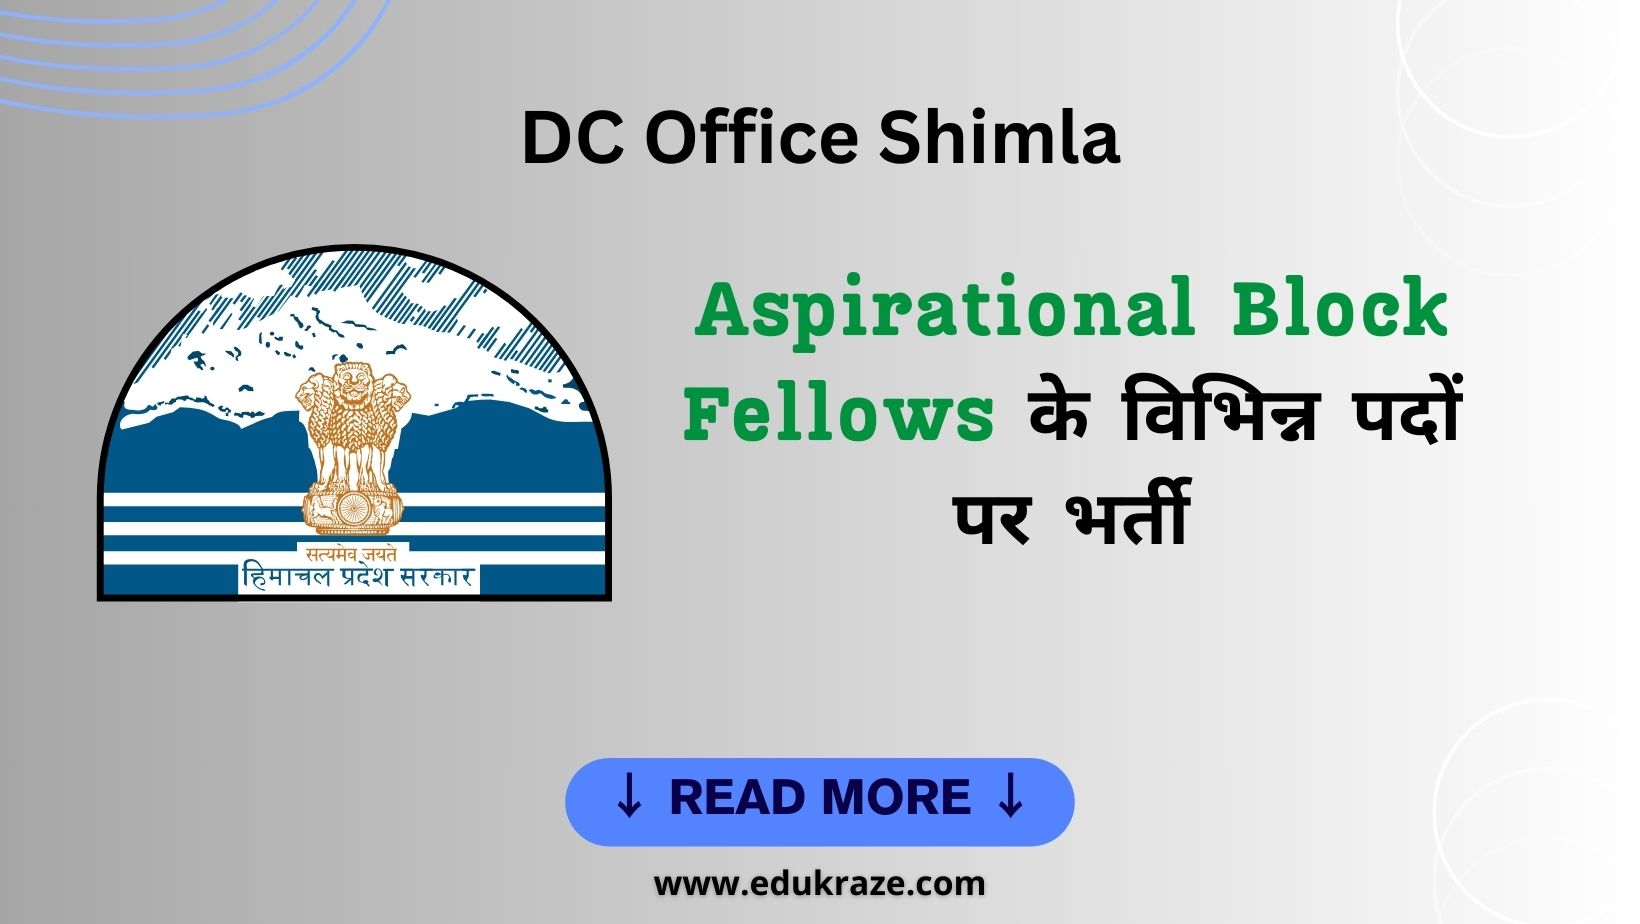 You are currently viewing Aspirational Block Fellows Recruitment in DC Office Shimla